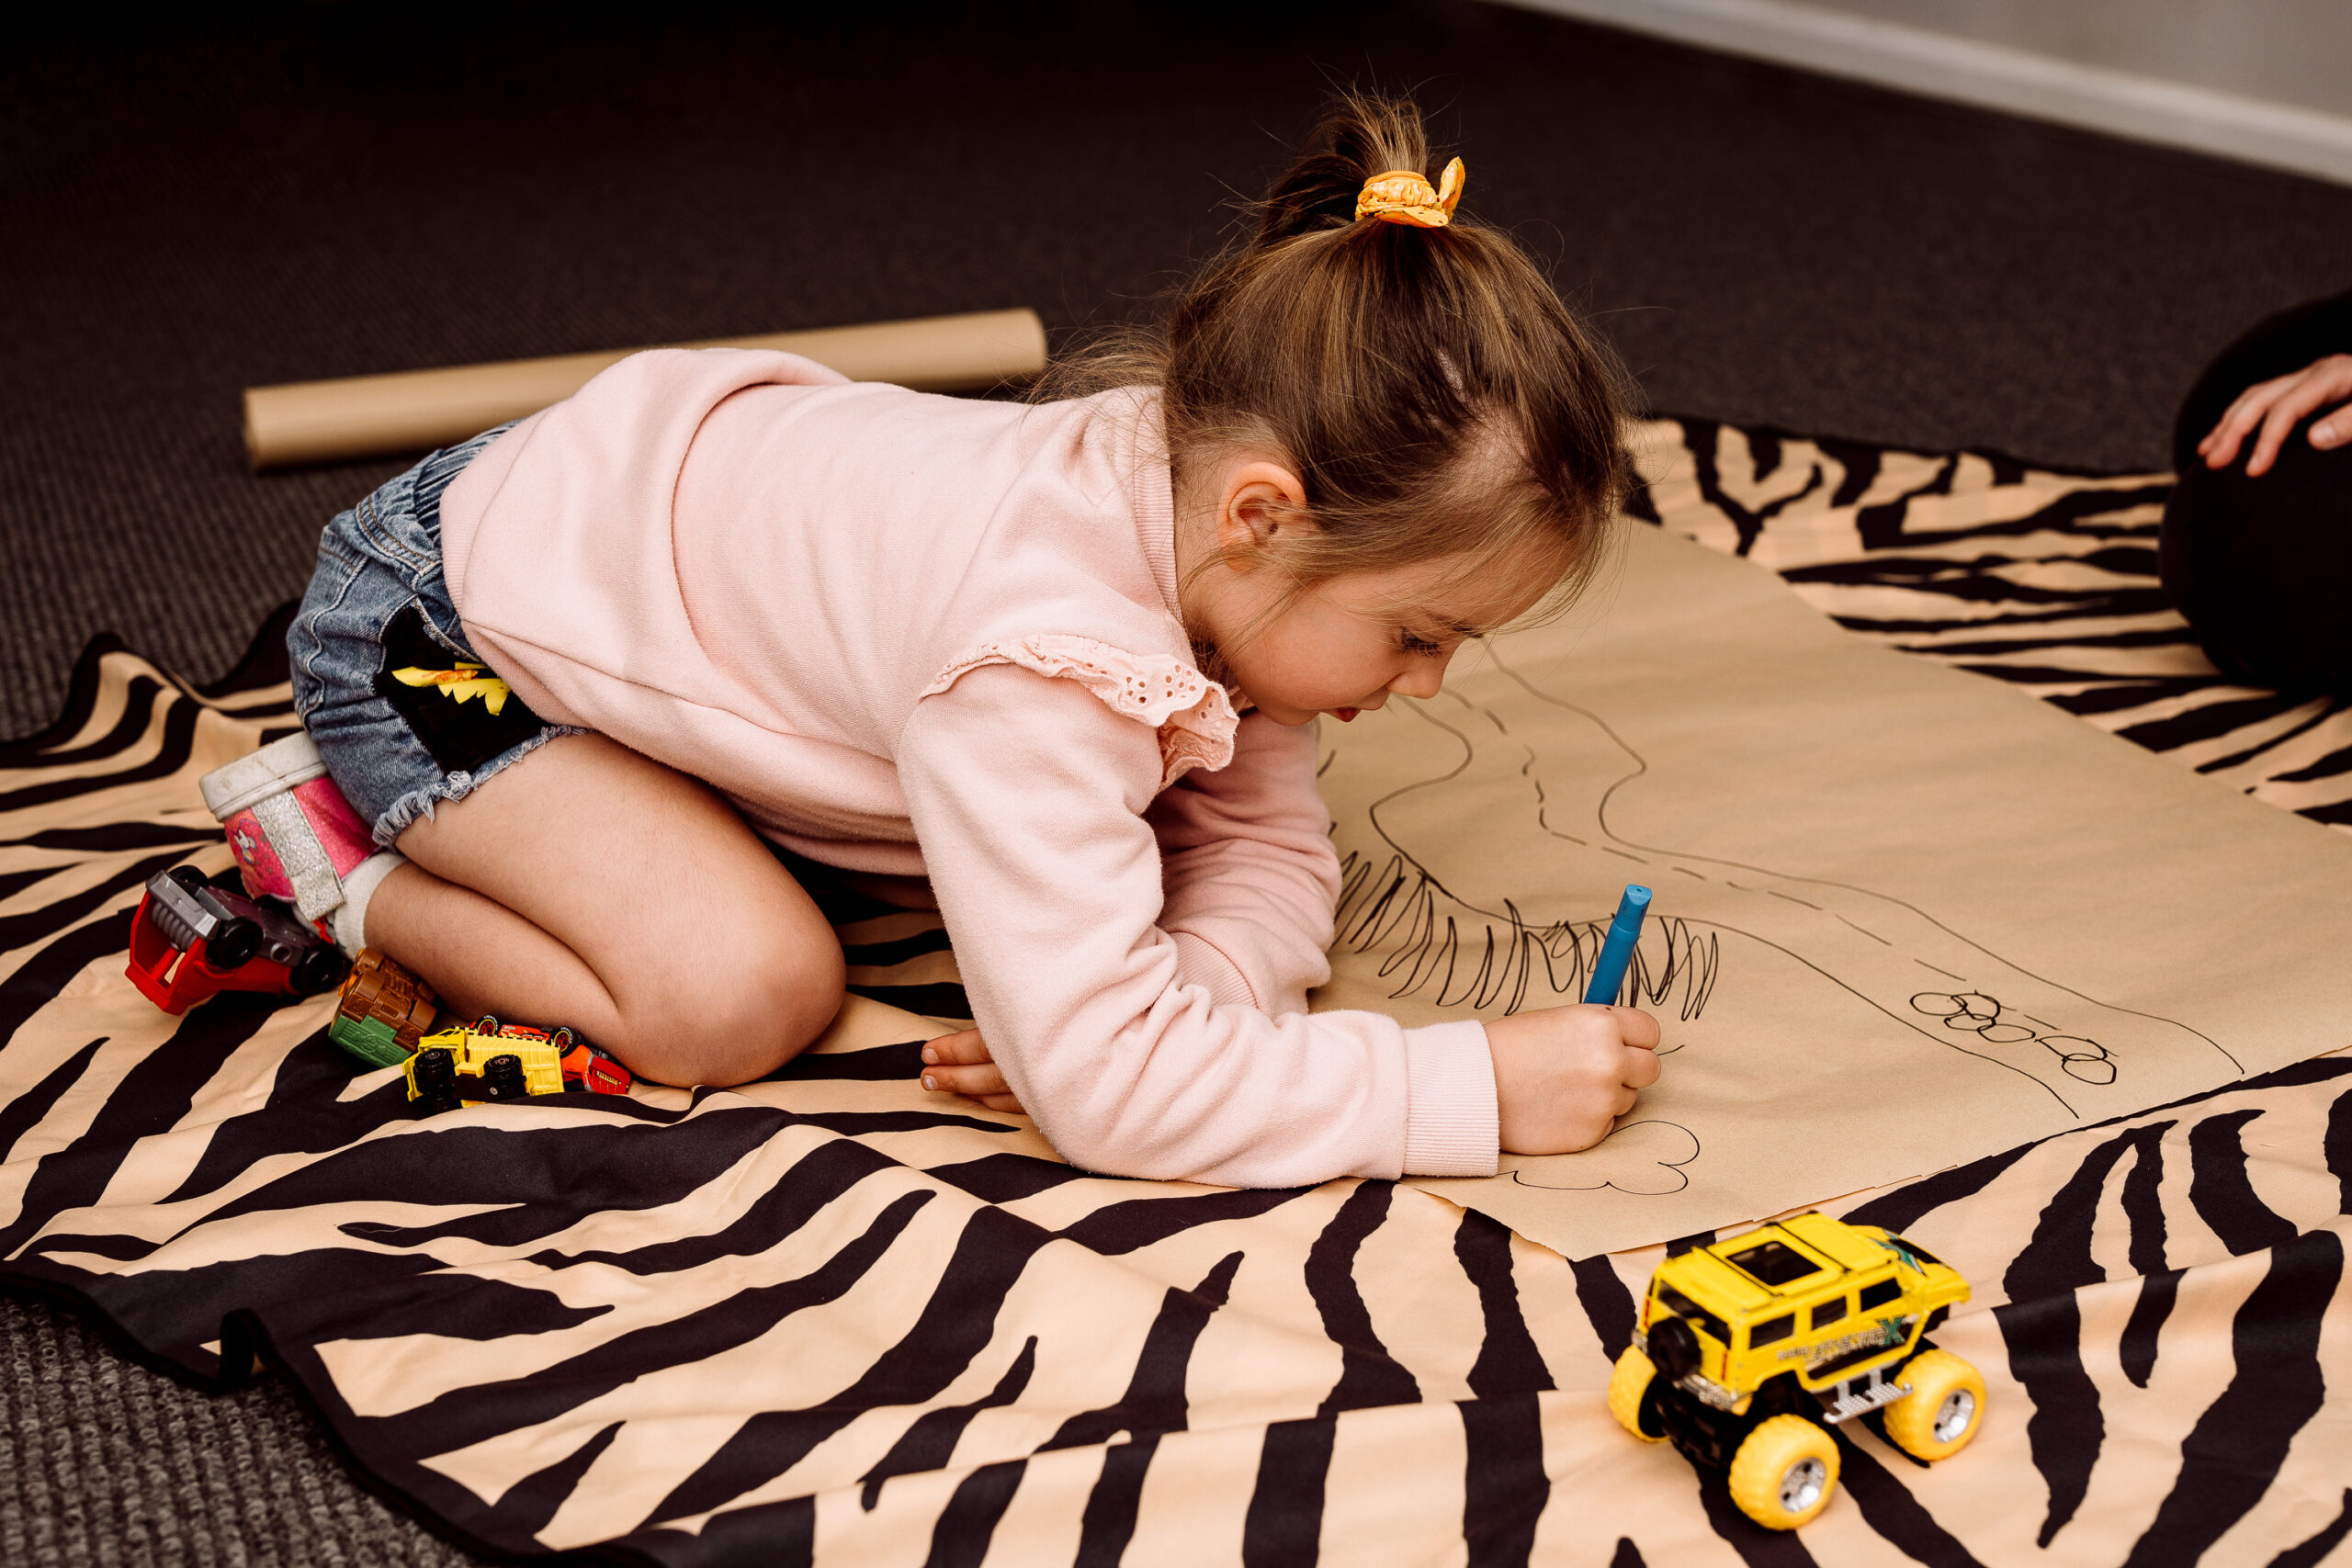 A young girl draws on paper on the floor.